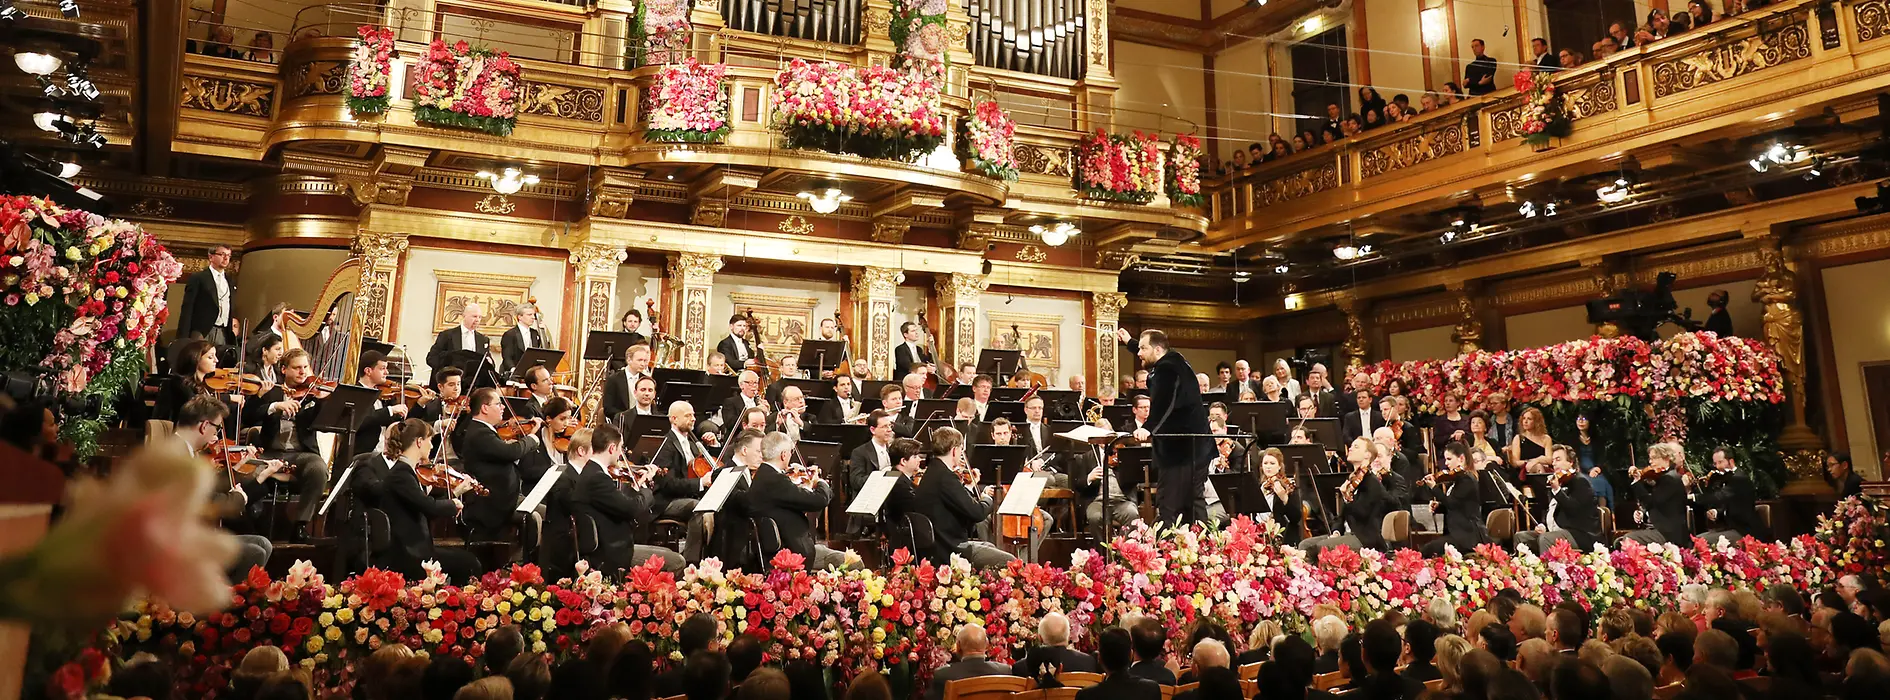 19 Facts About Vienna New Year's Concert